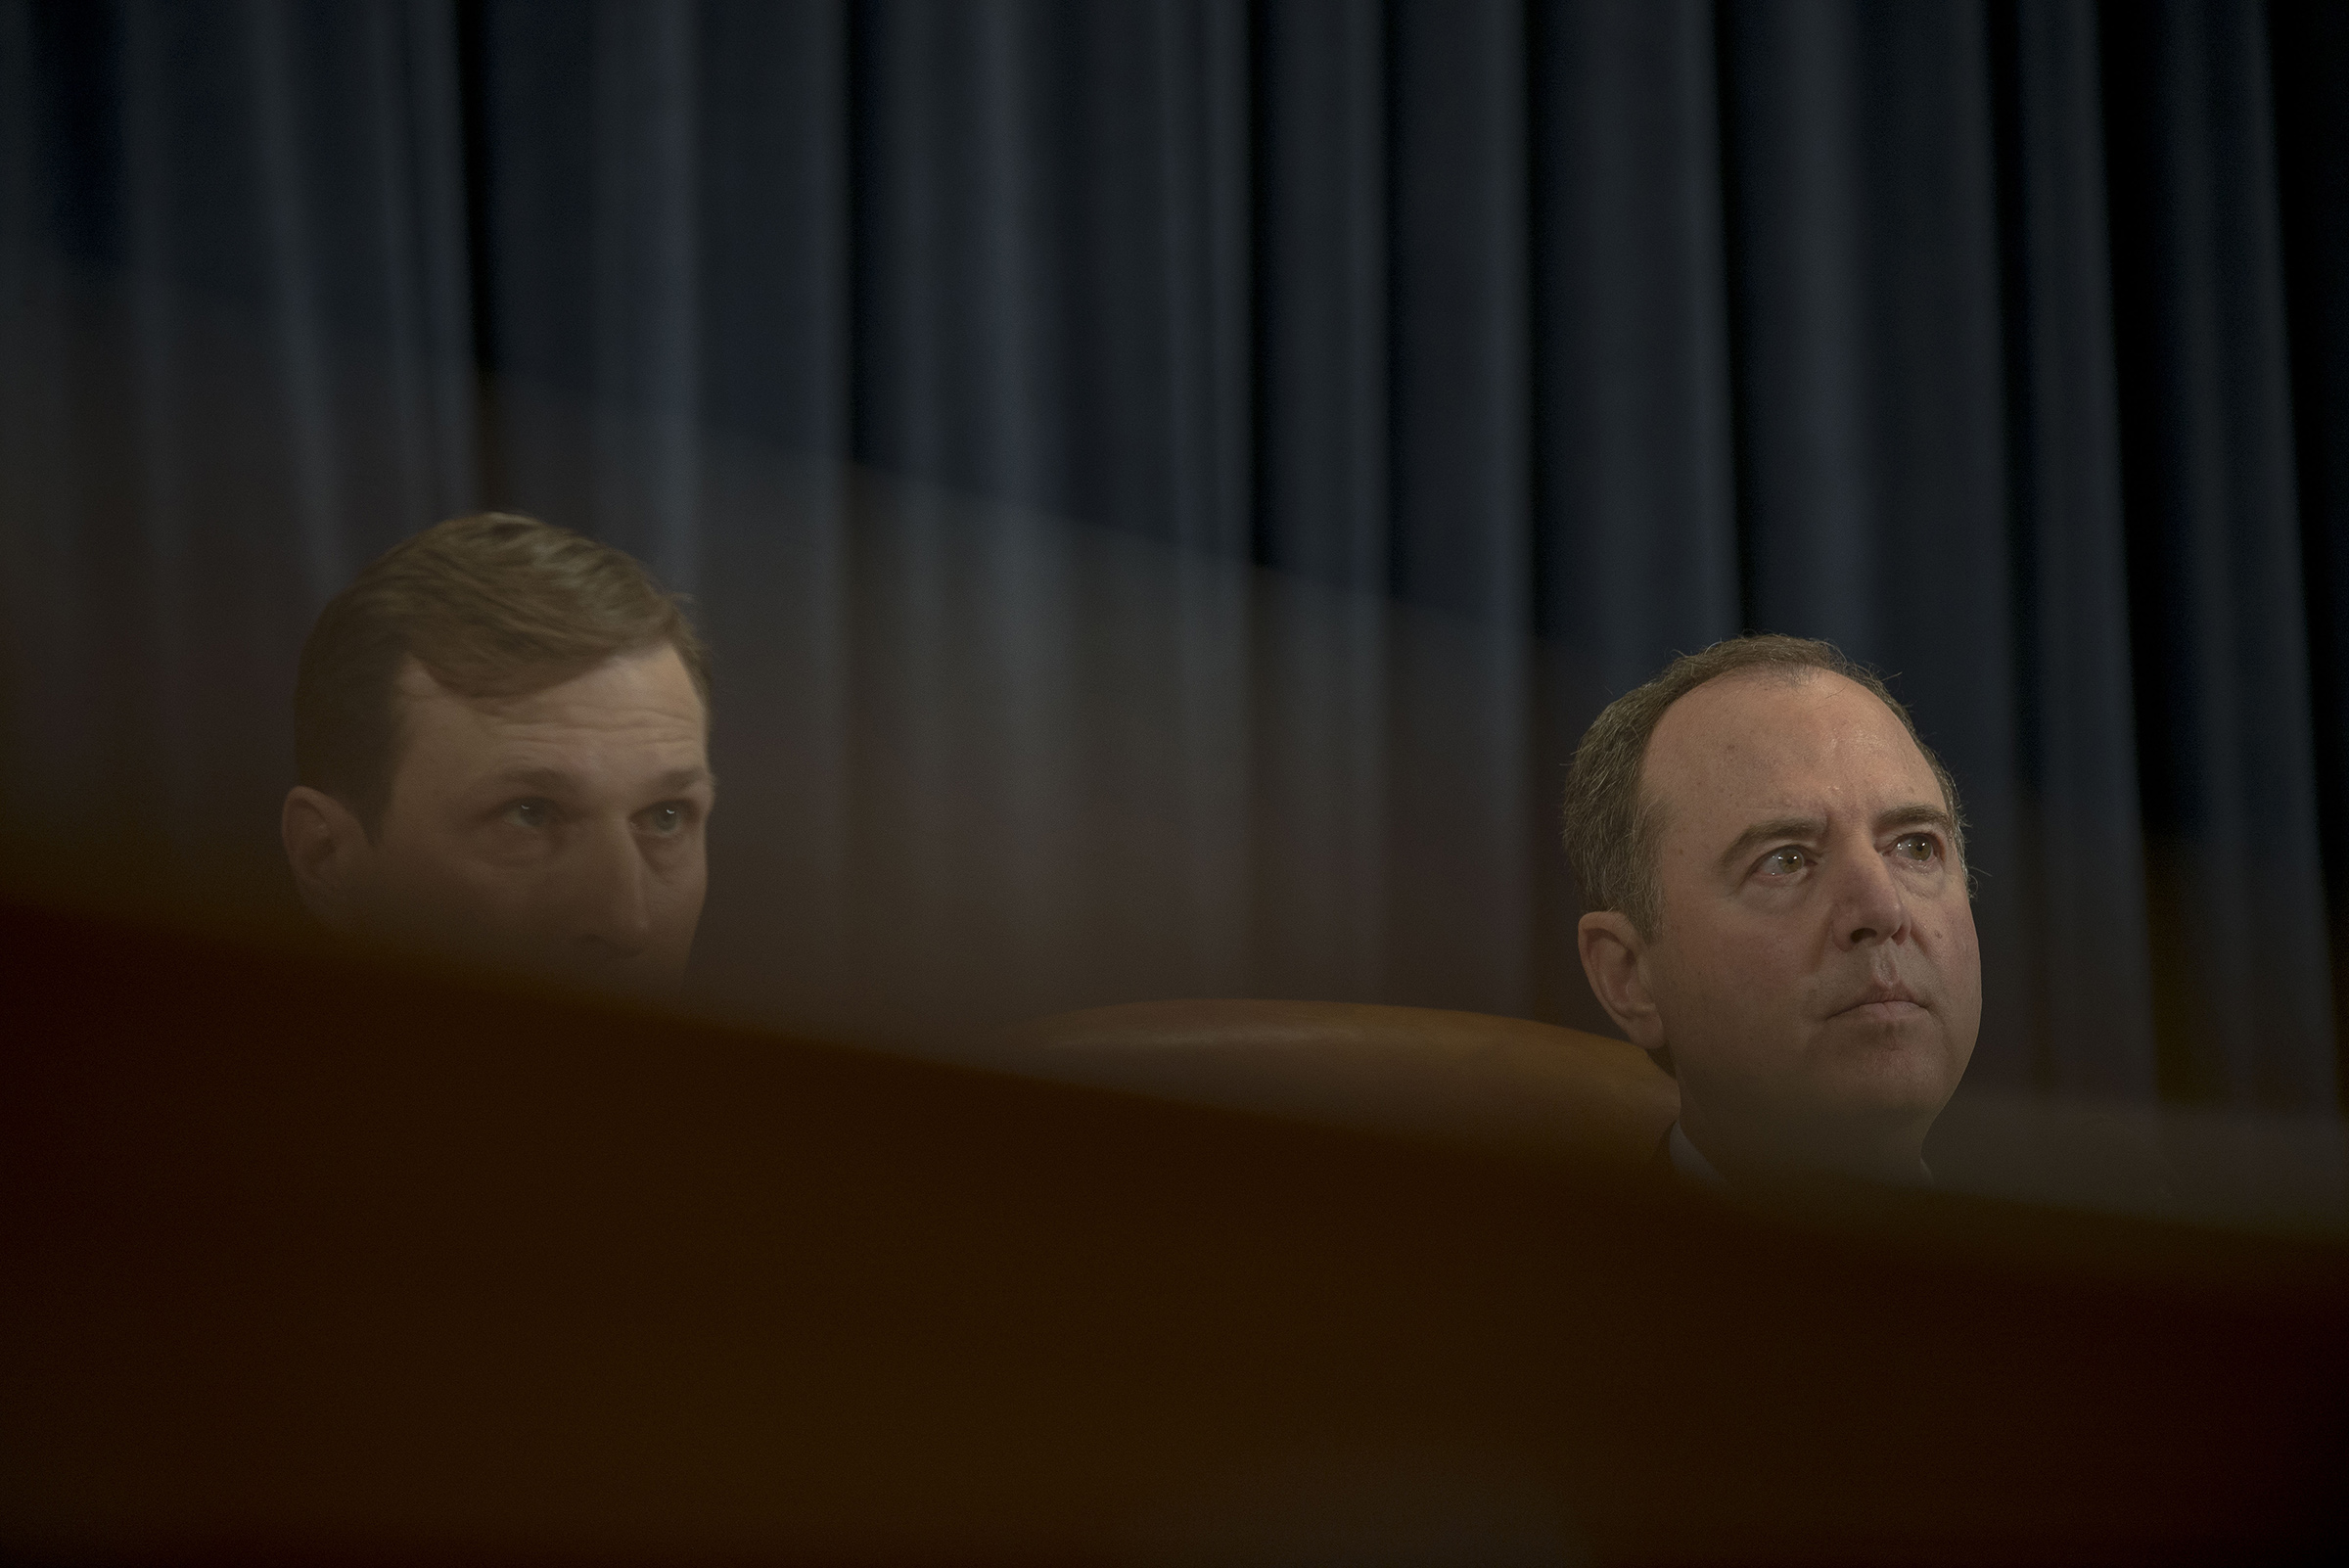 11/20/19, Capitol Hill, Washington, D.C. Chairman Adam Schiff (D-Calif.) and Democratic counsel Daniel Goldman listen to Ambassador Gordon Sondland testify during the House Intelligence Committee hearing on the impeachment inquiry at the Longworth House Office building on Capitol Hill in Washington, D.C. on Nov. 20, 2019.Gabriella Demczuk / TIME